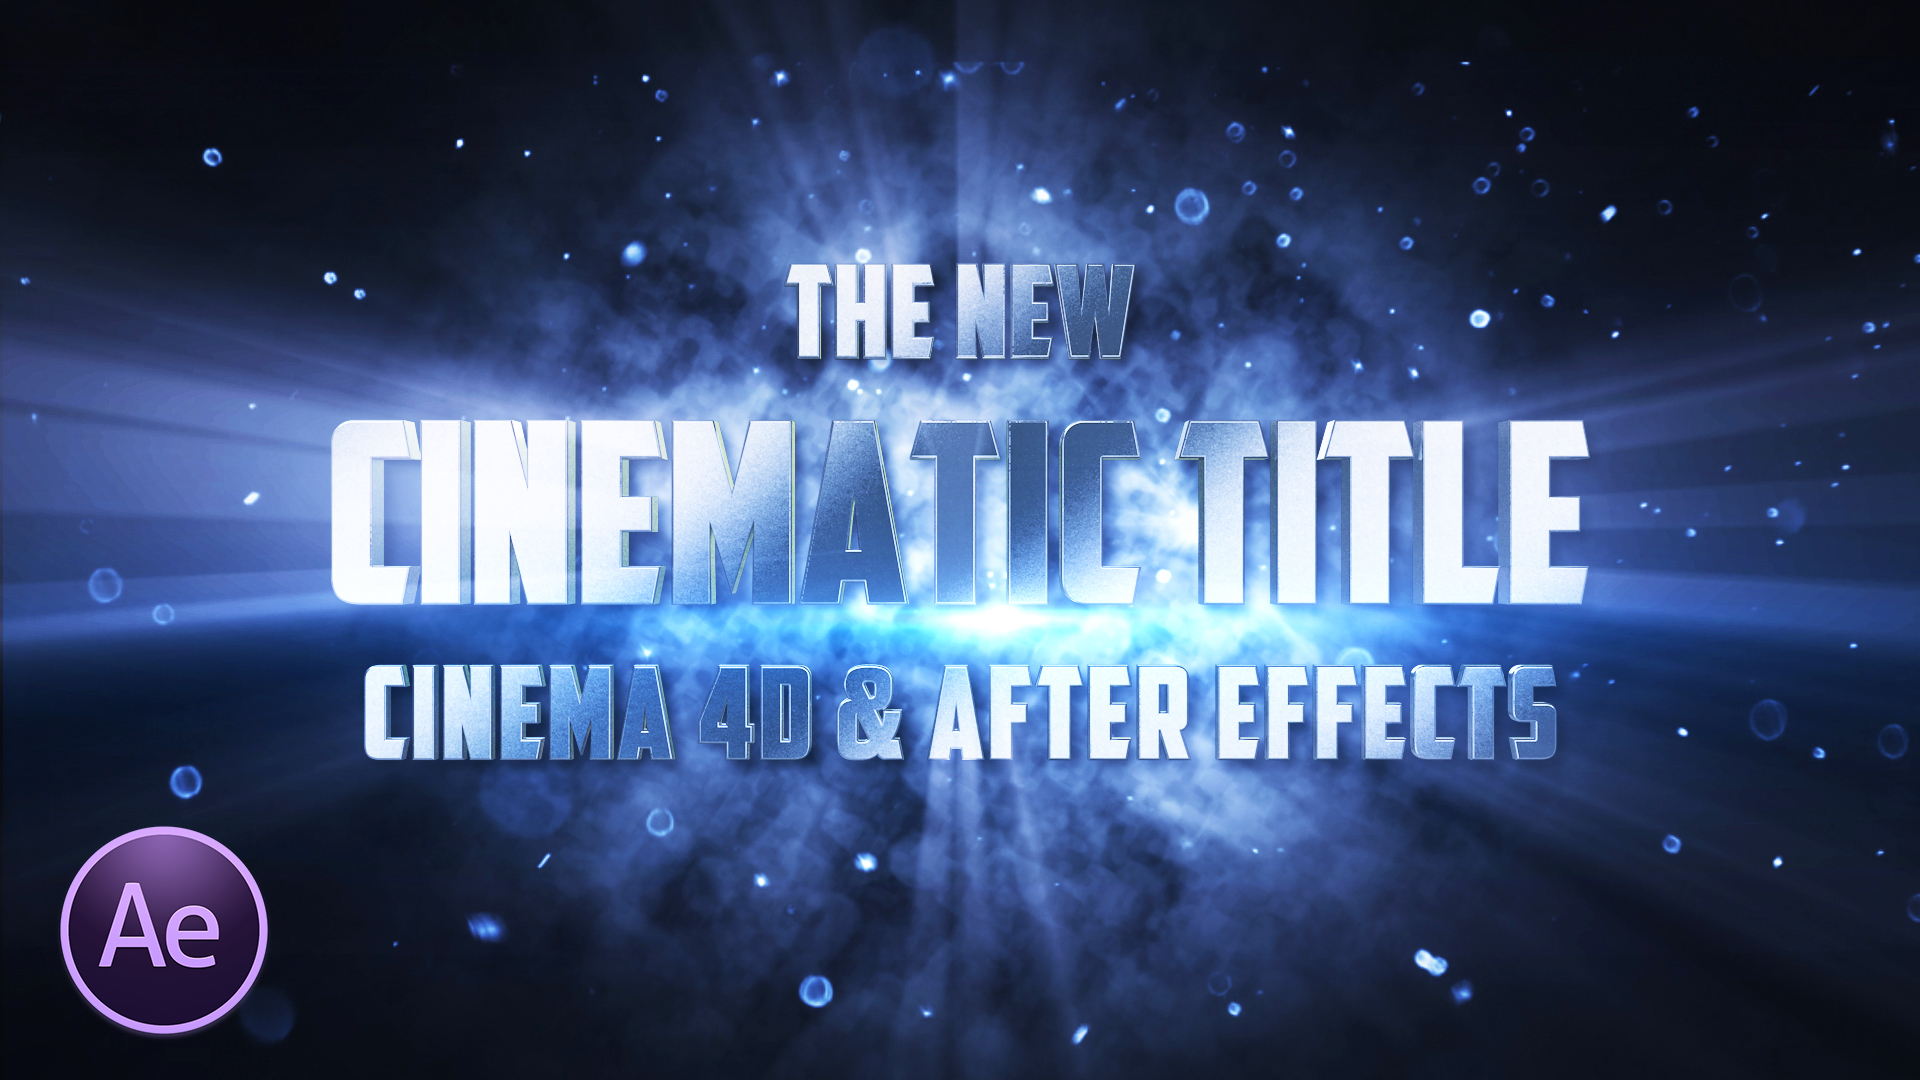  After Effects Templates Free Download Zip Get What You Need For Free